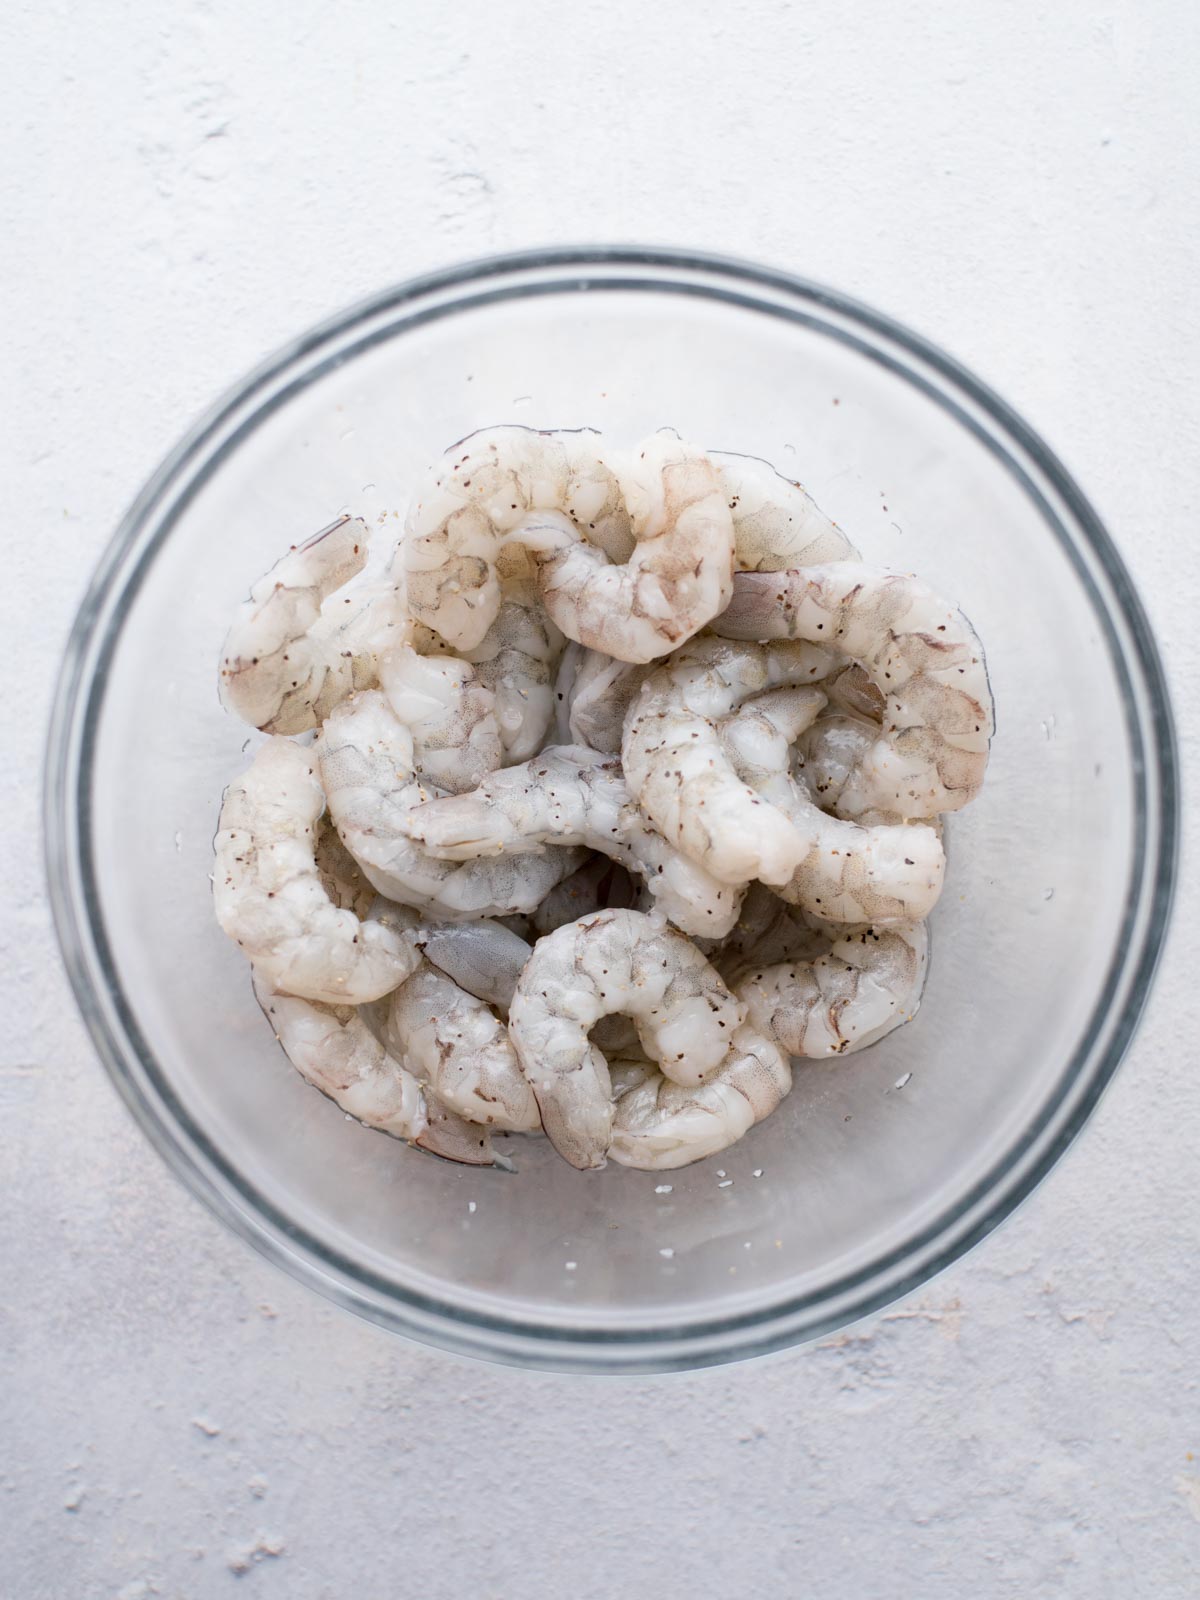 shrimp in a glass mixing bowl seasoned with salt and pepper